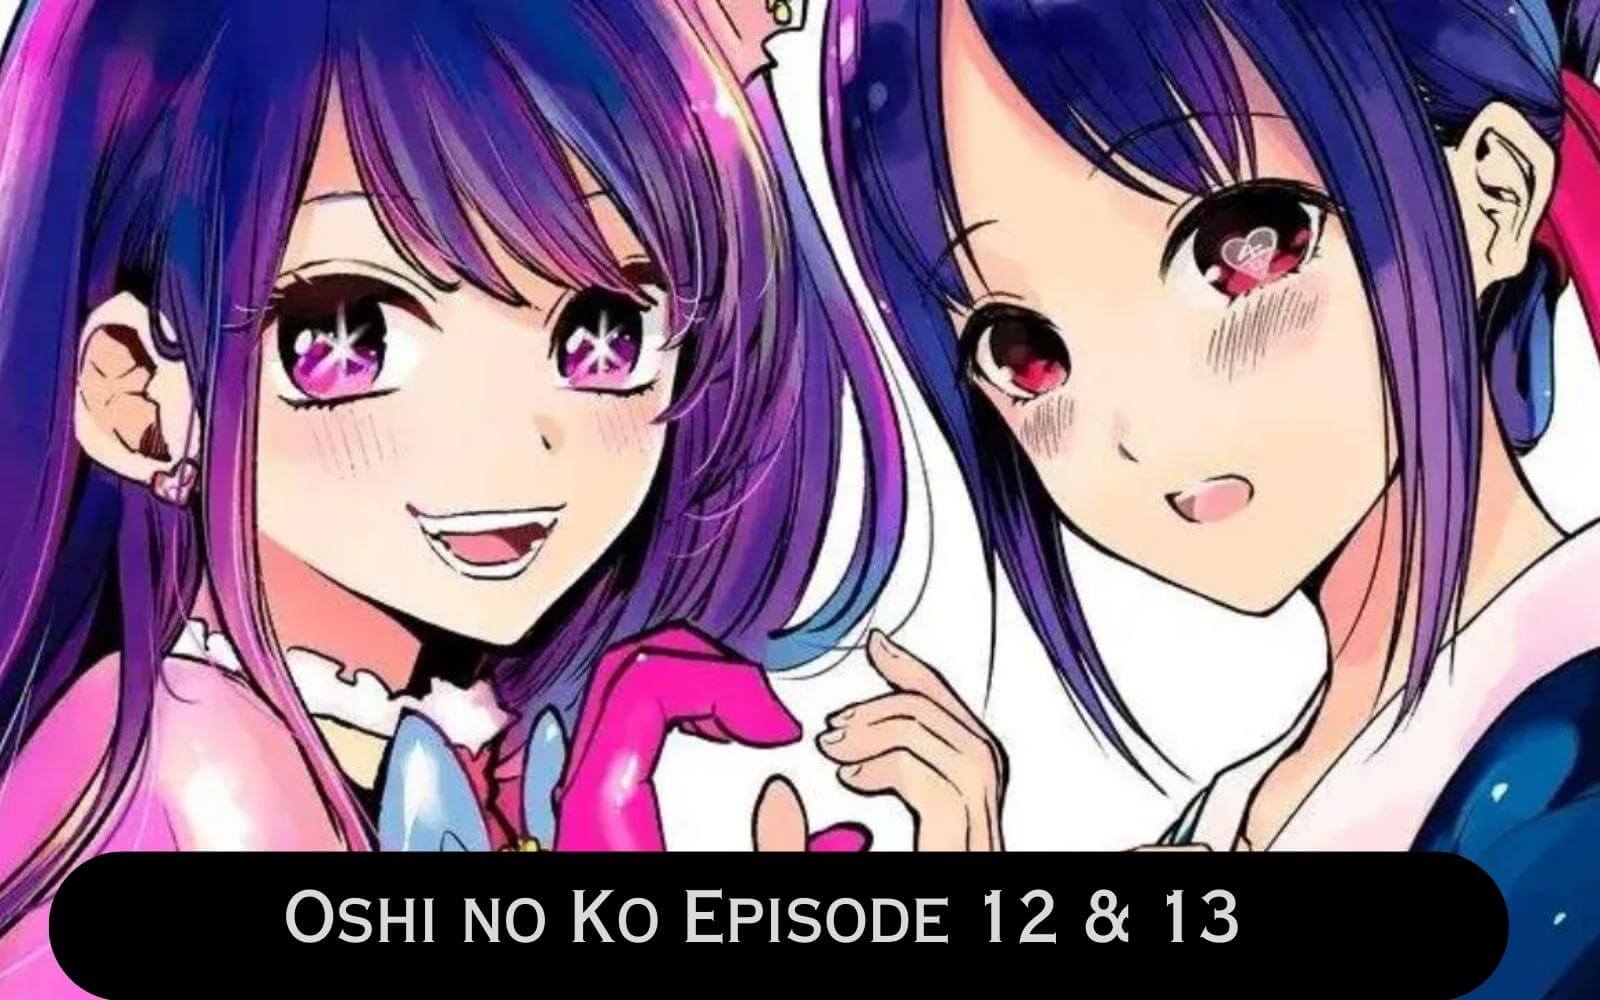 Oshi no Ko Episode 9 releases today - Exact release time and